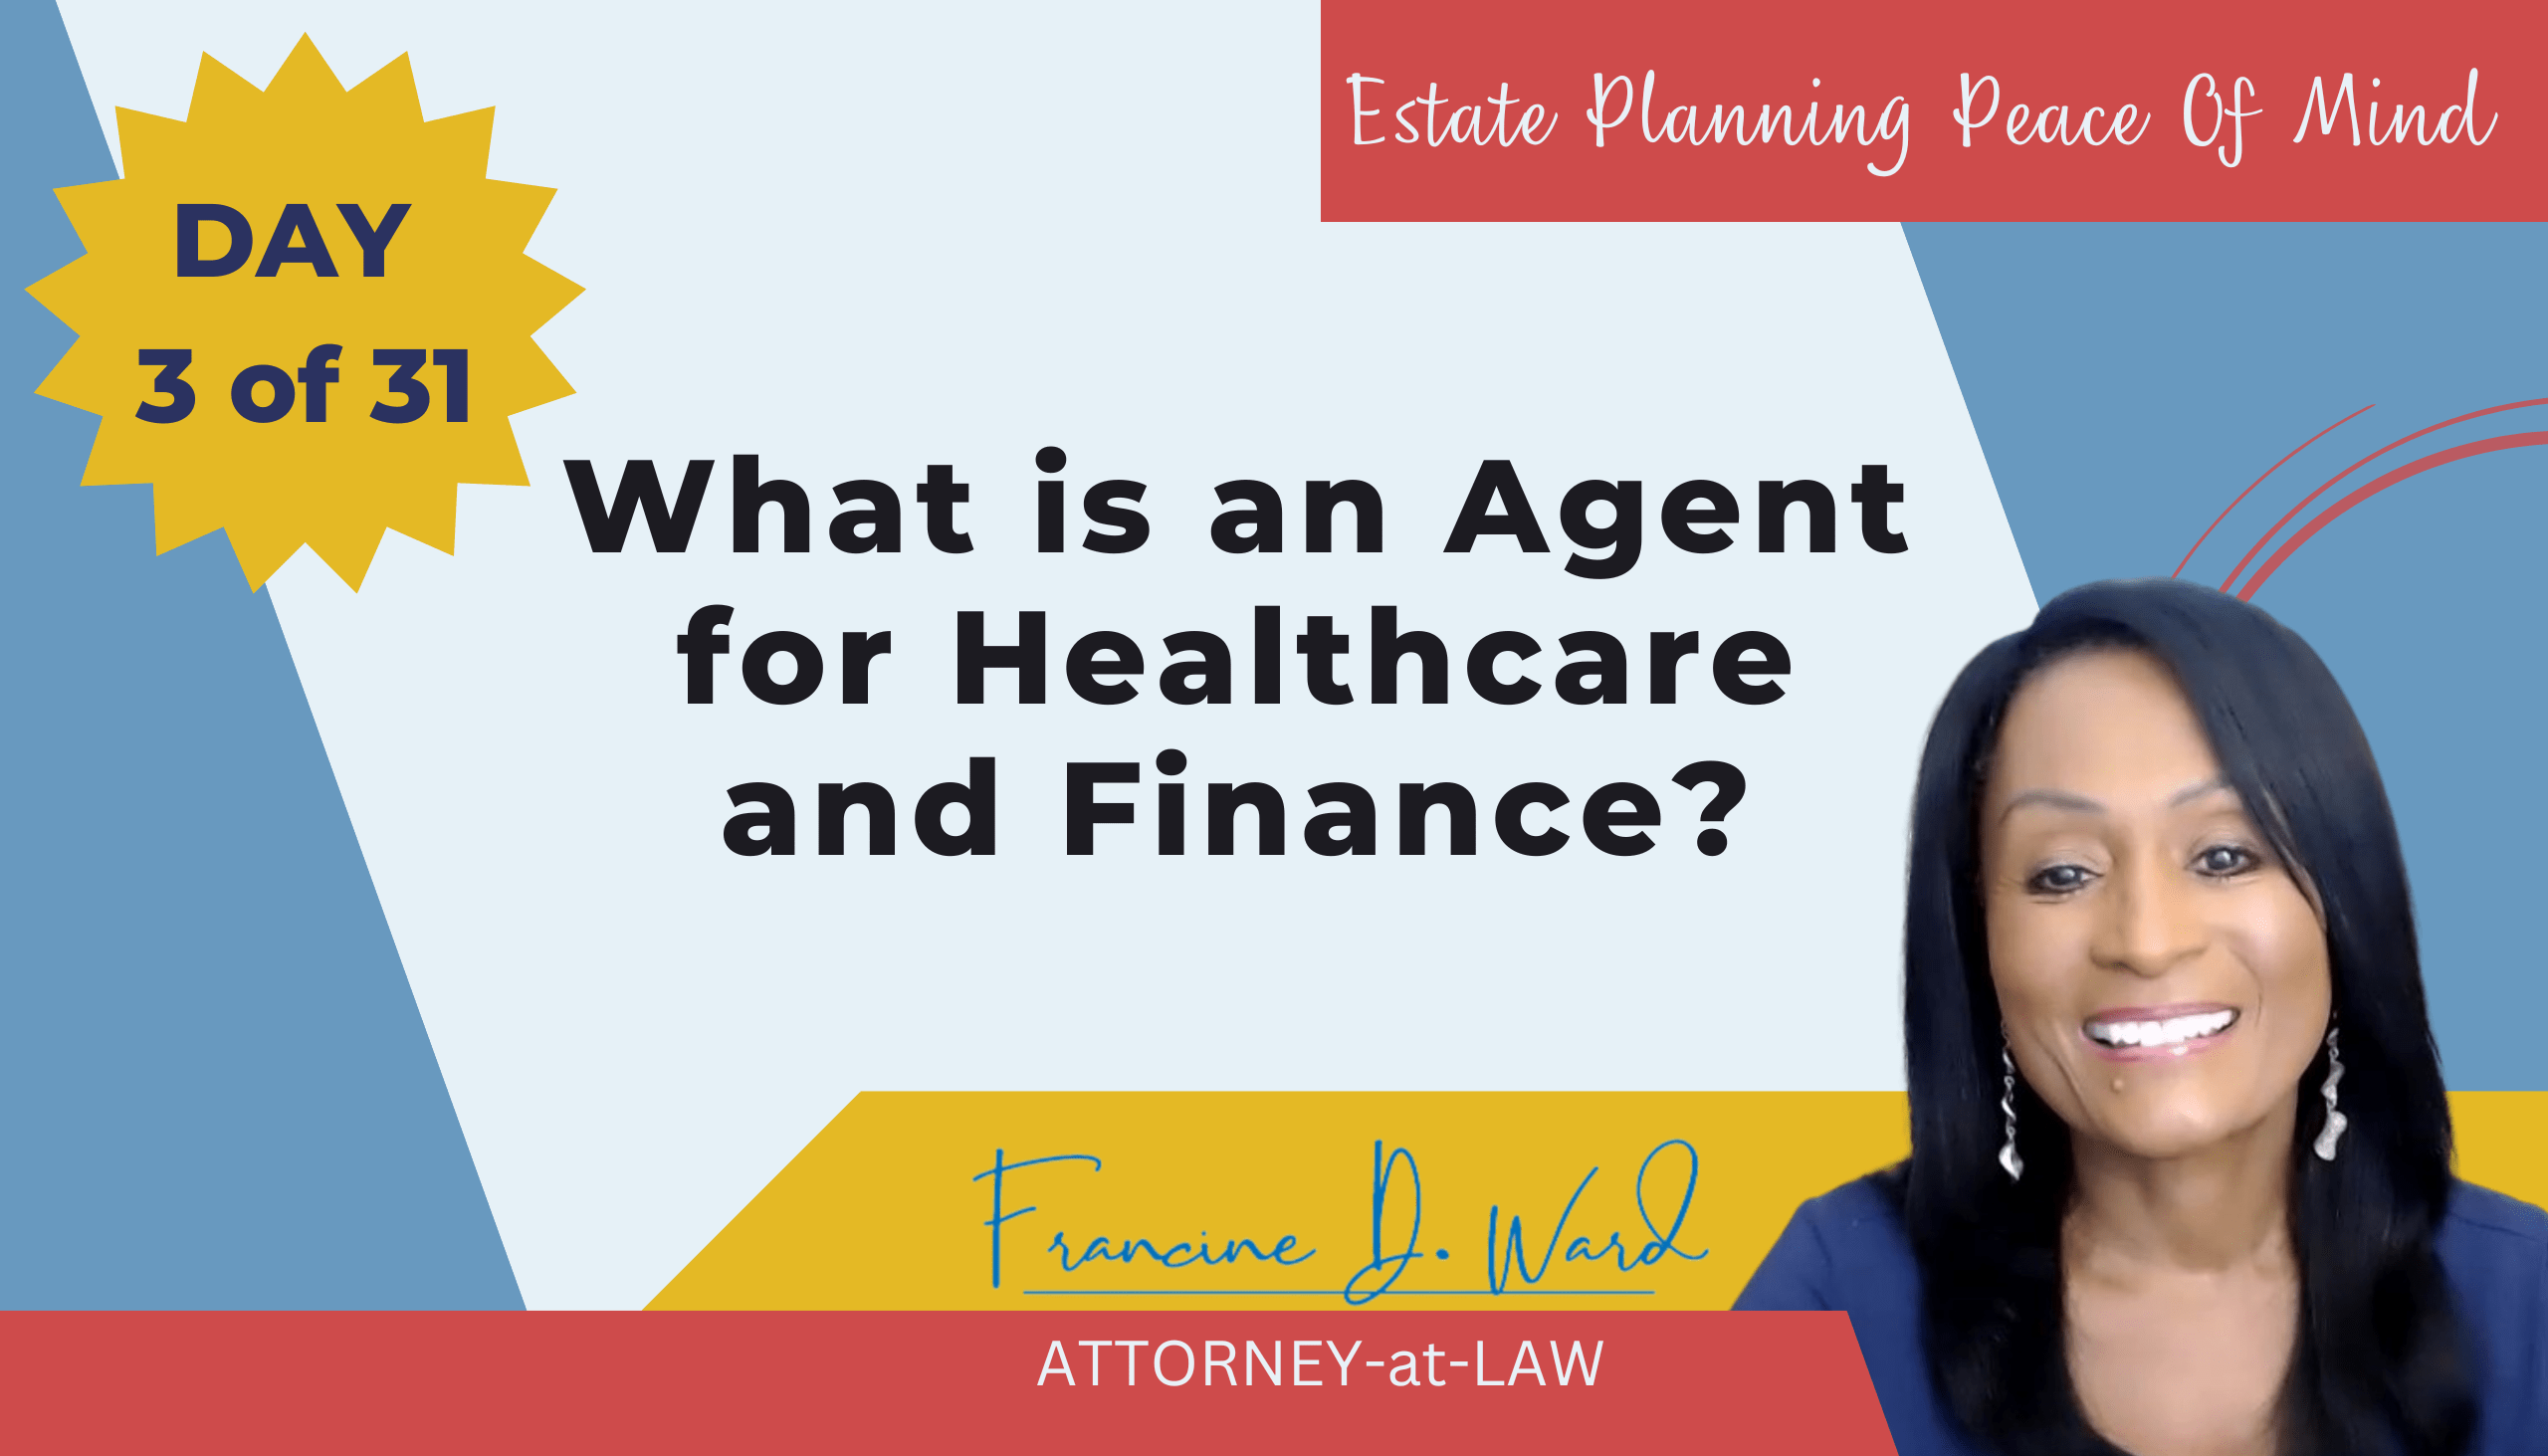 What is an Agent for Healthcare and Finance? - Francine D. Ward